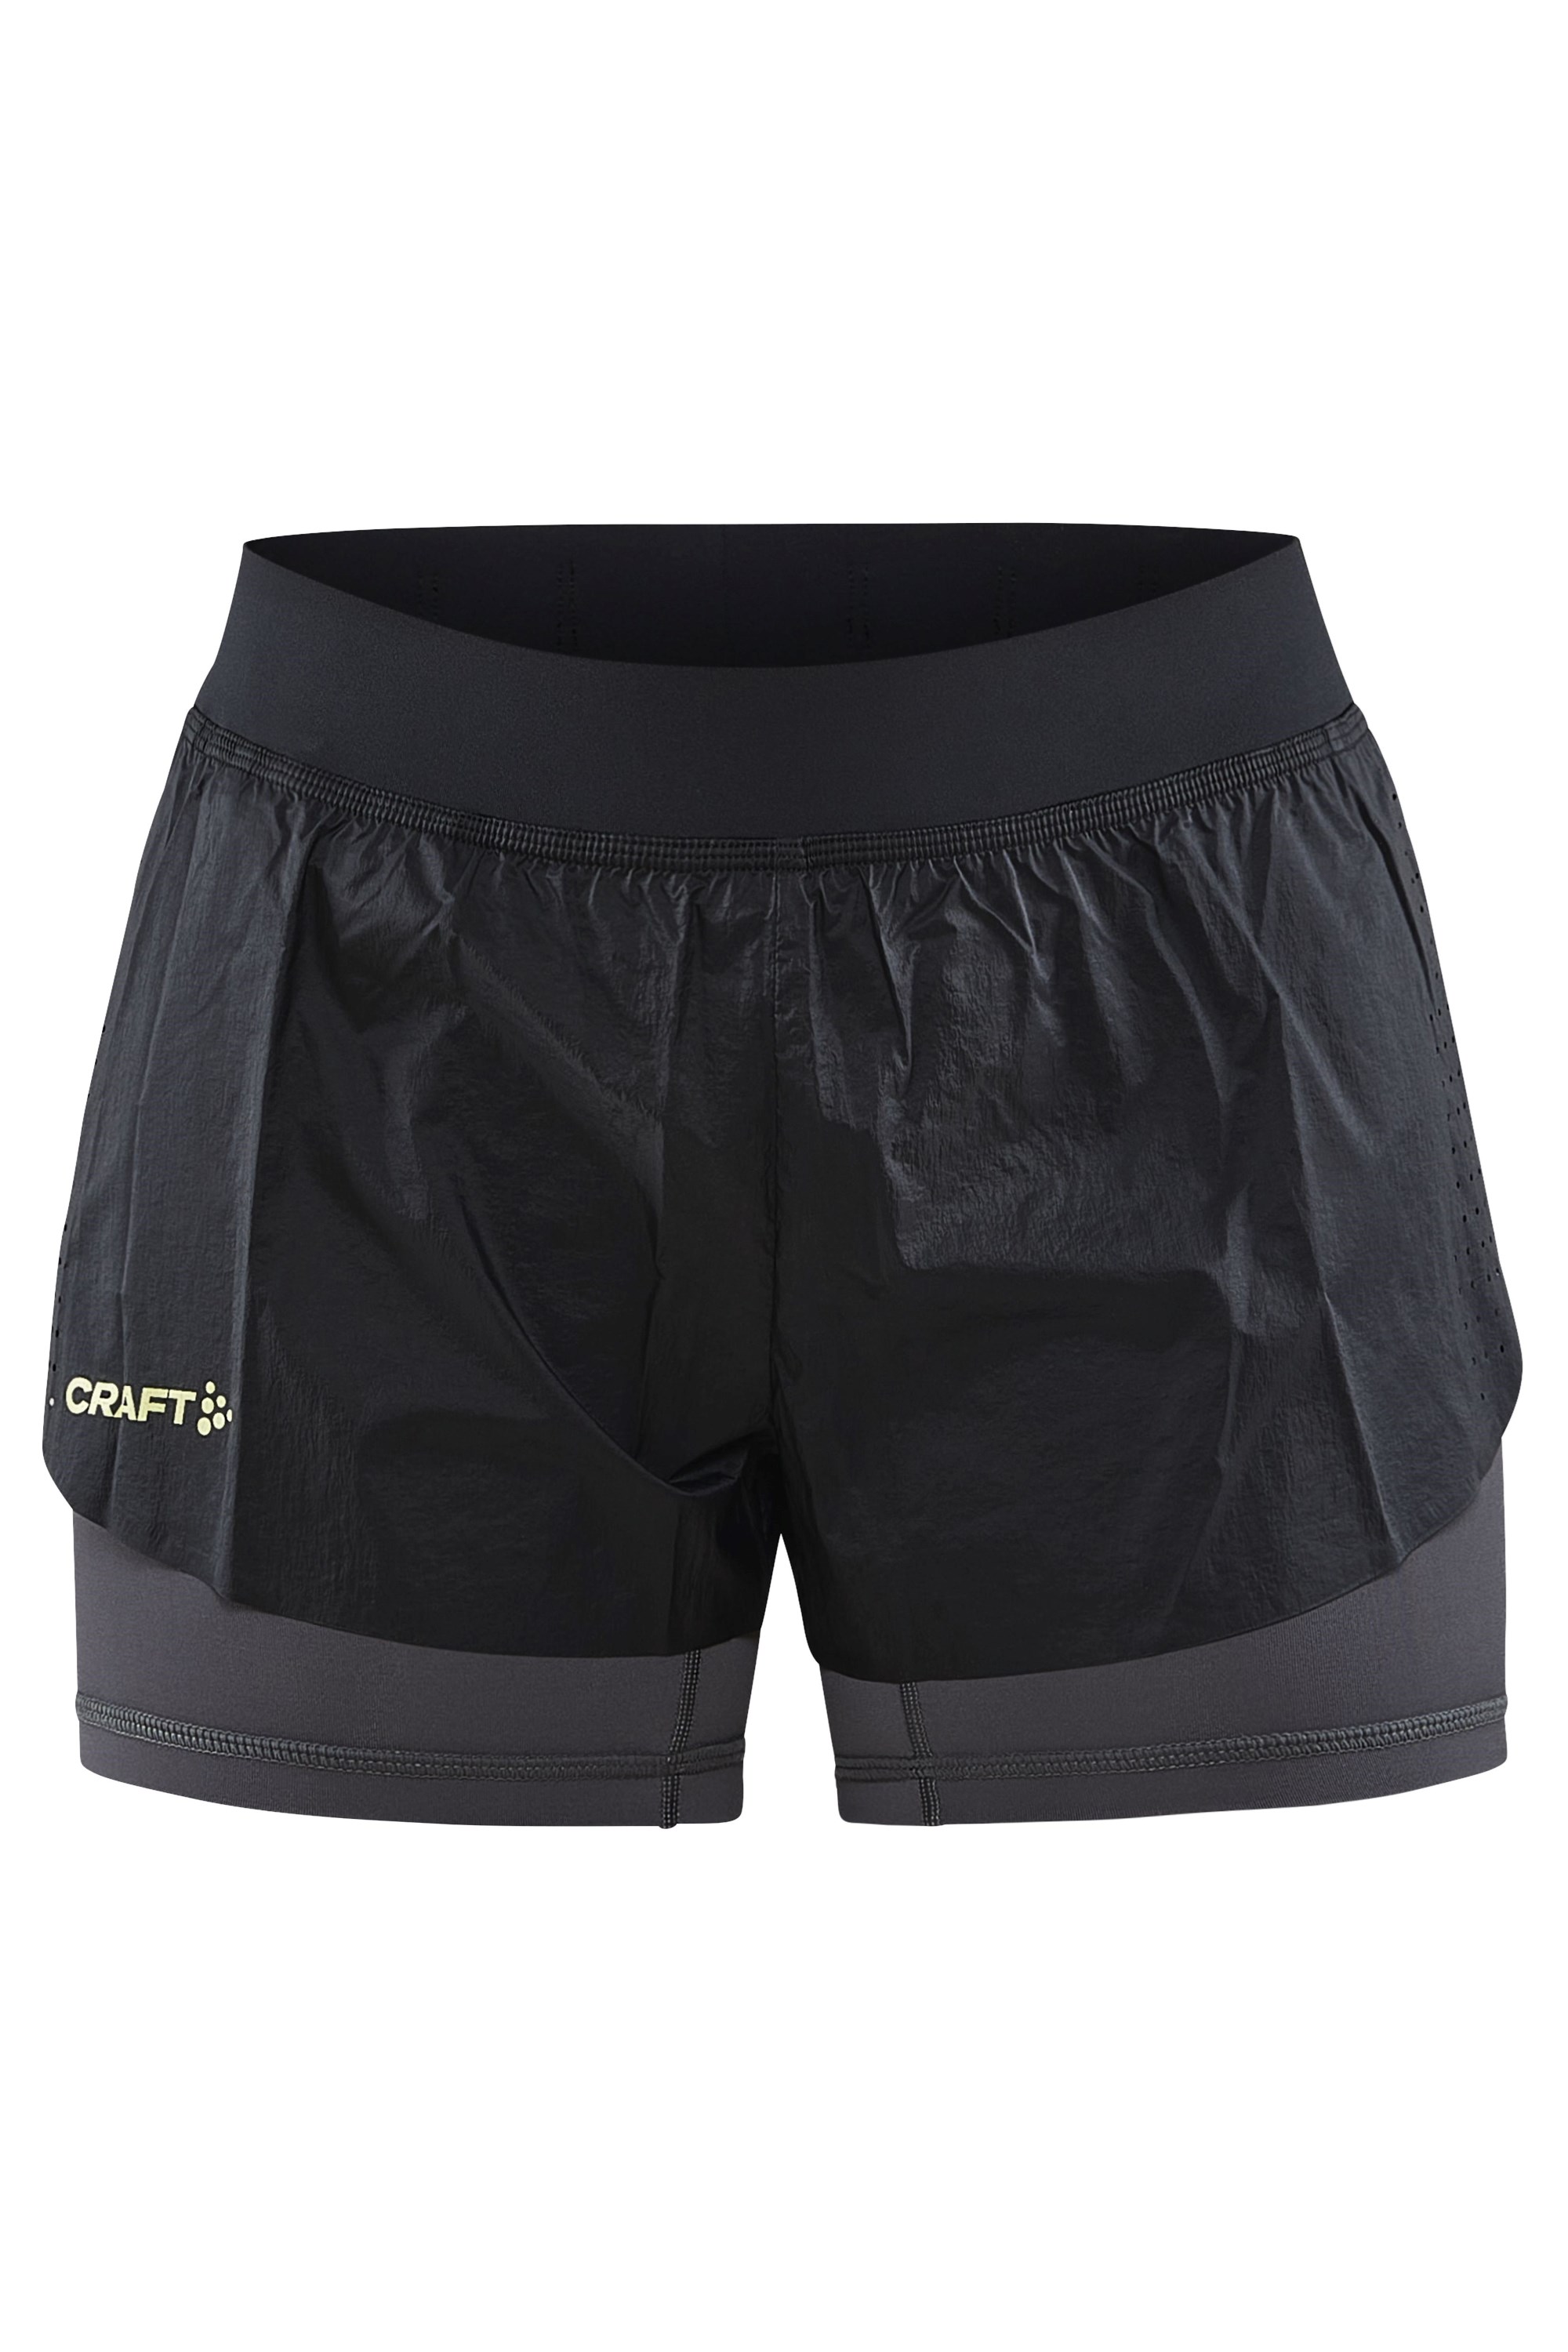 CTM Distance Womens 2 in 1 Running Shorts | Mountain Warehouse GB